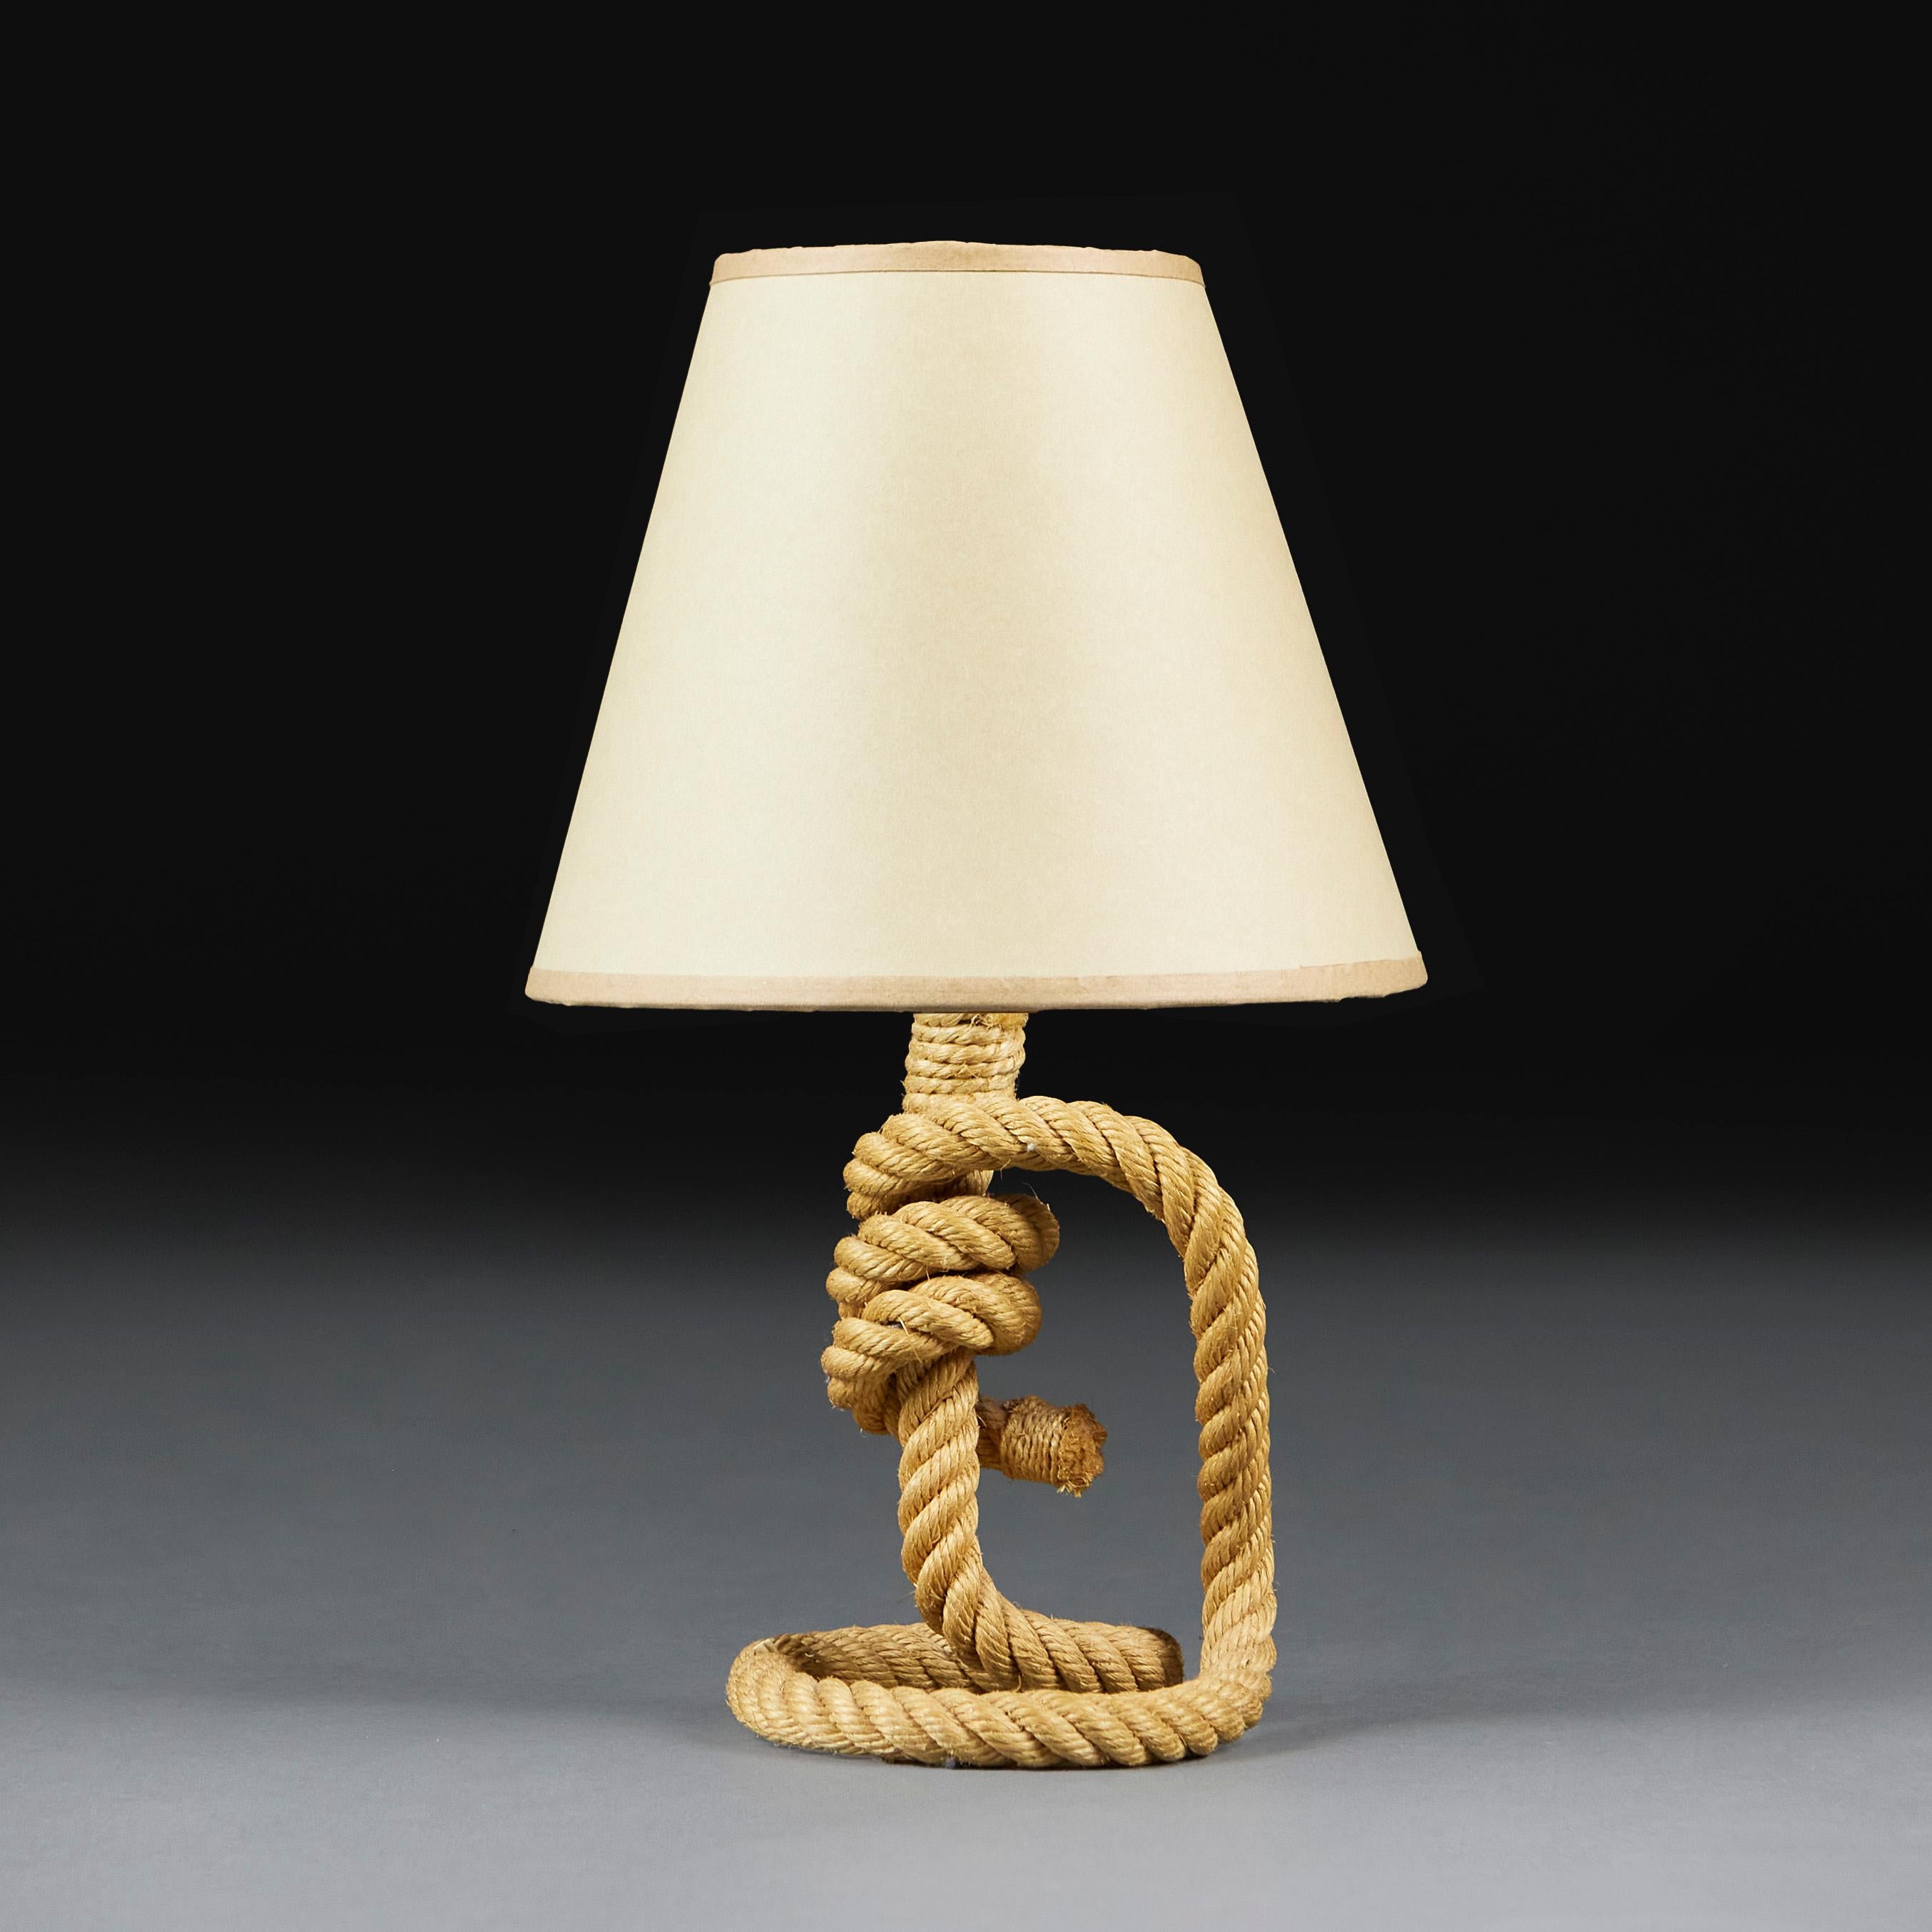 France, circa 1950
A rope twist lamp of small scale, in the manner of Audoux Minet, with knotted centre and looping arm to one side. 

Adrian Audoux and Frida Minet were a prolific French Modernist designer duo active in the 1940s and 50s. Their